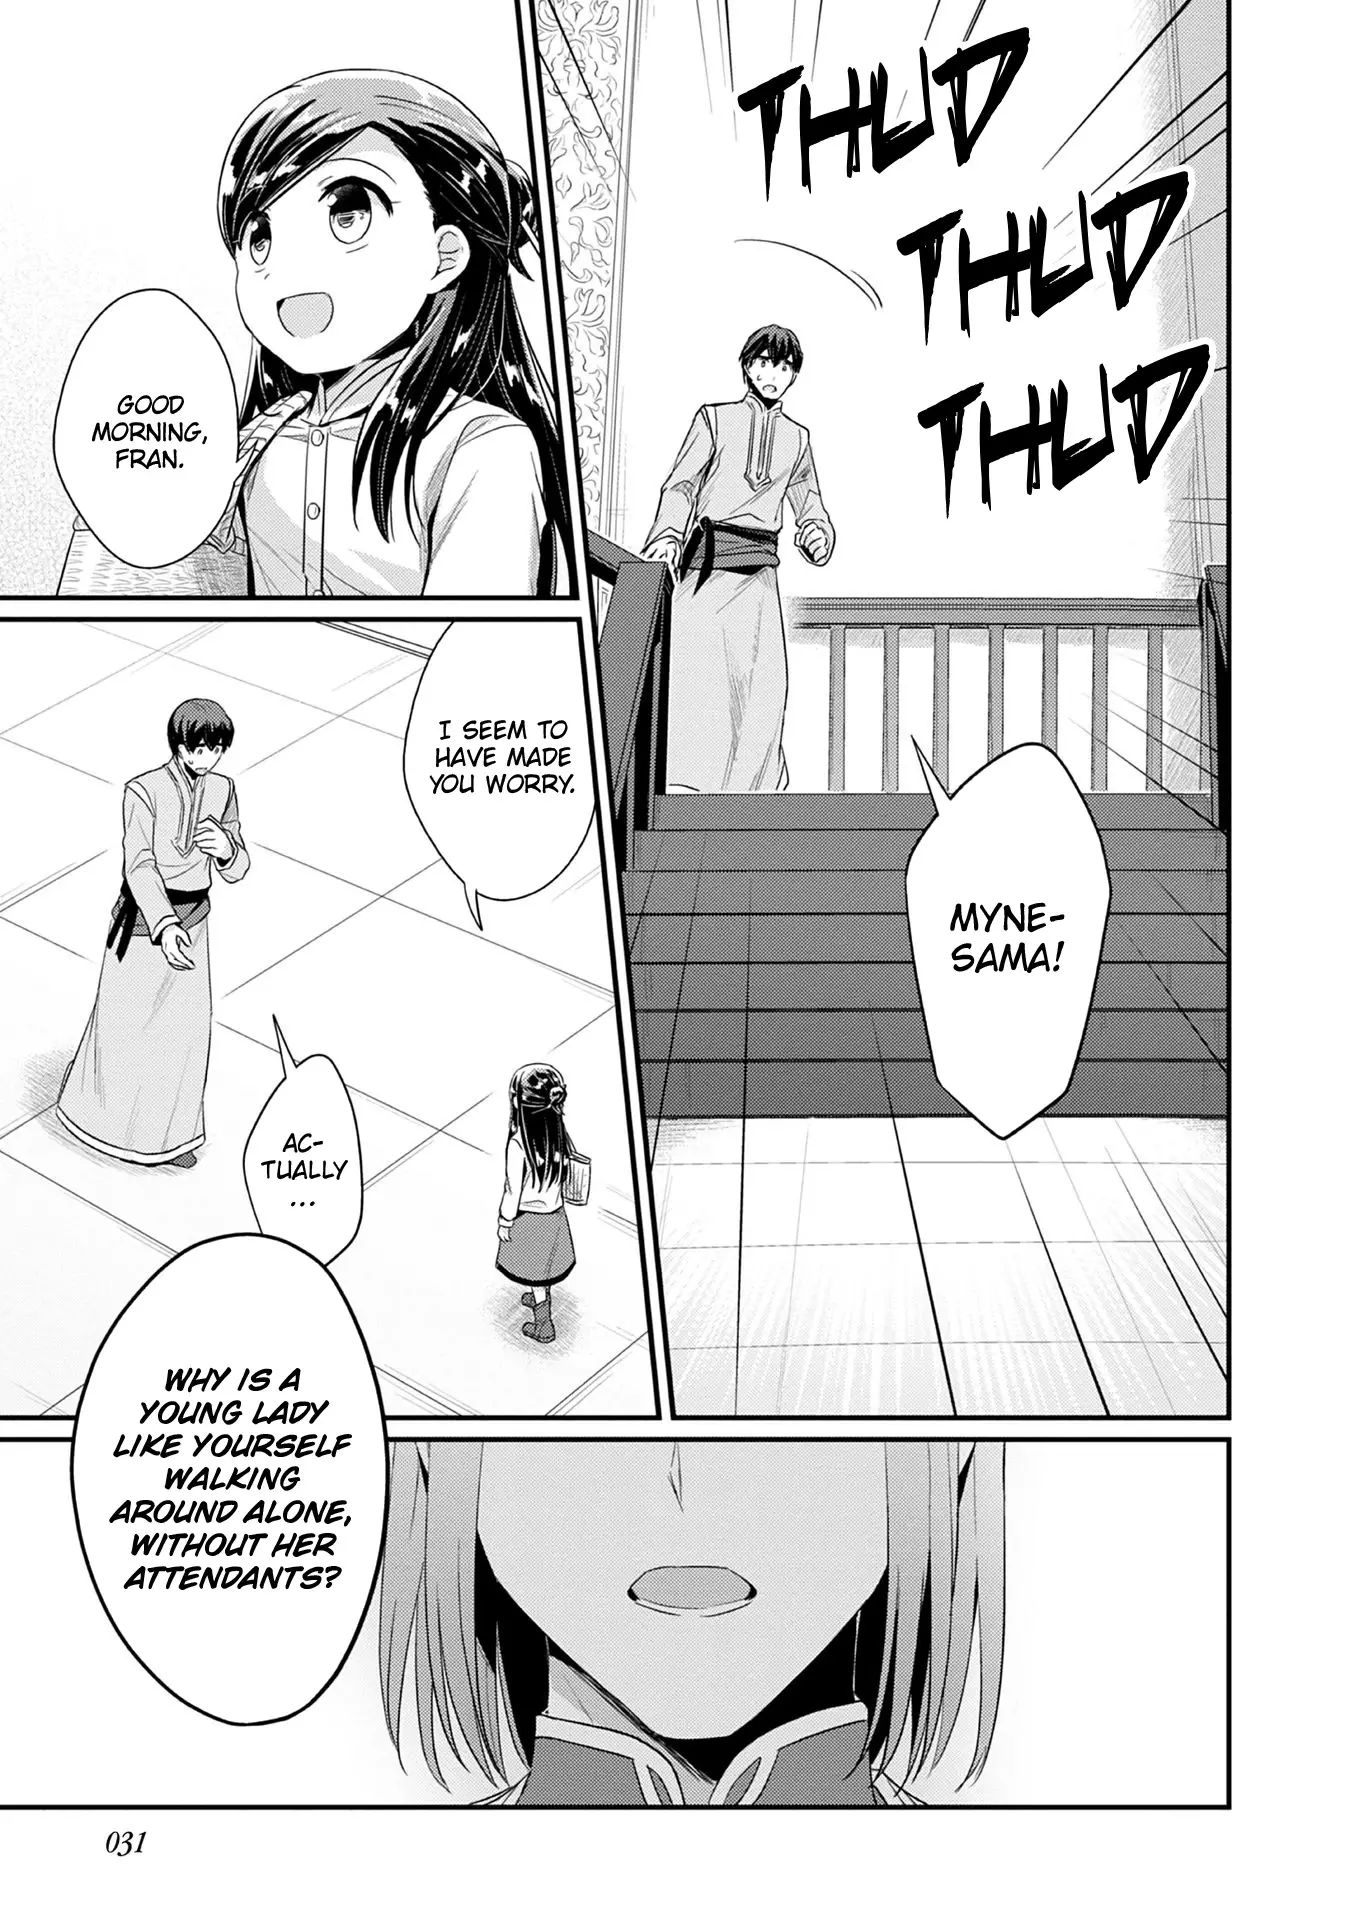 Ascendance Of A Bookworm ~I'll Do Anything To Become A Librarian~ Part 2 「I'll Become A Shrine Maiden For Books!」 - 17 page 4